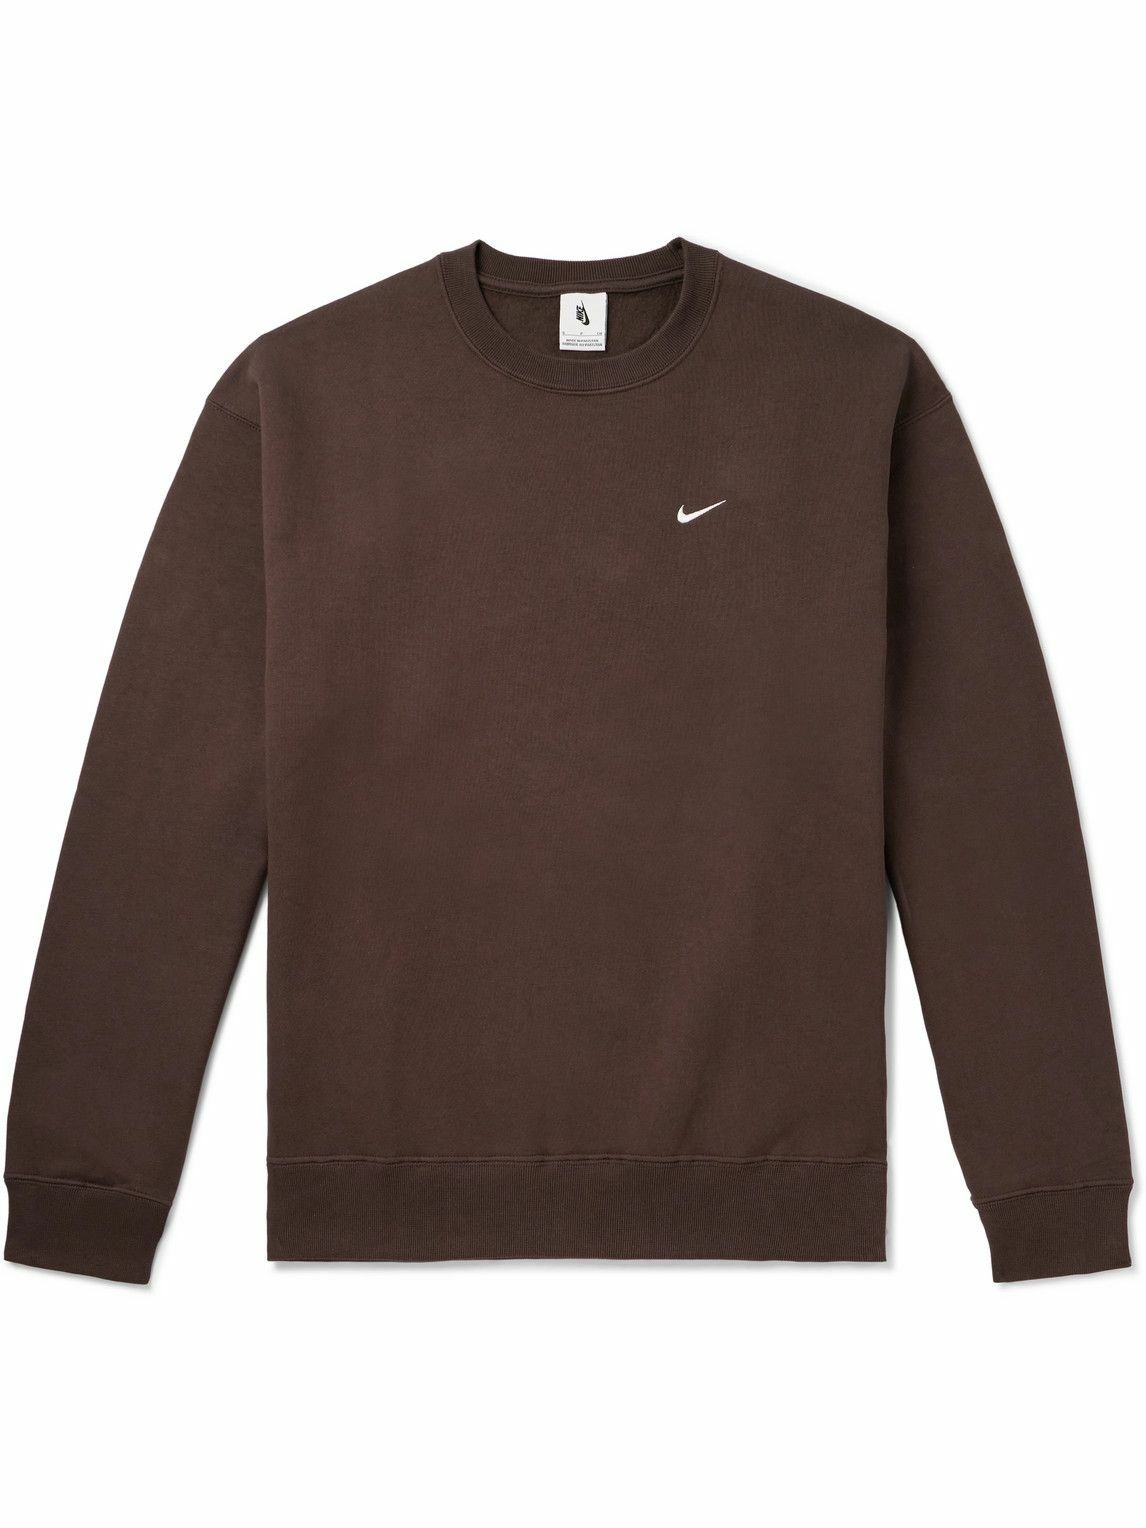 Photo: Nike - Solo Swoosh Logo-Embroidered Cotton-Blend Jersey Sweatshirt - Brown